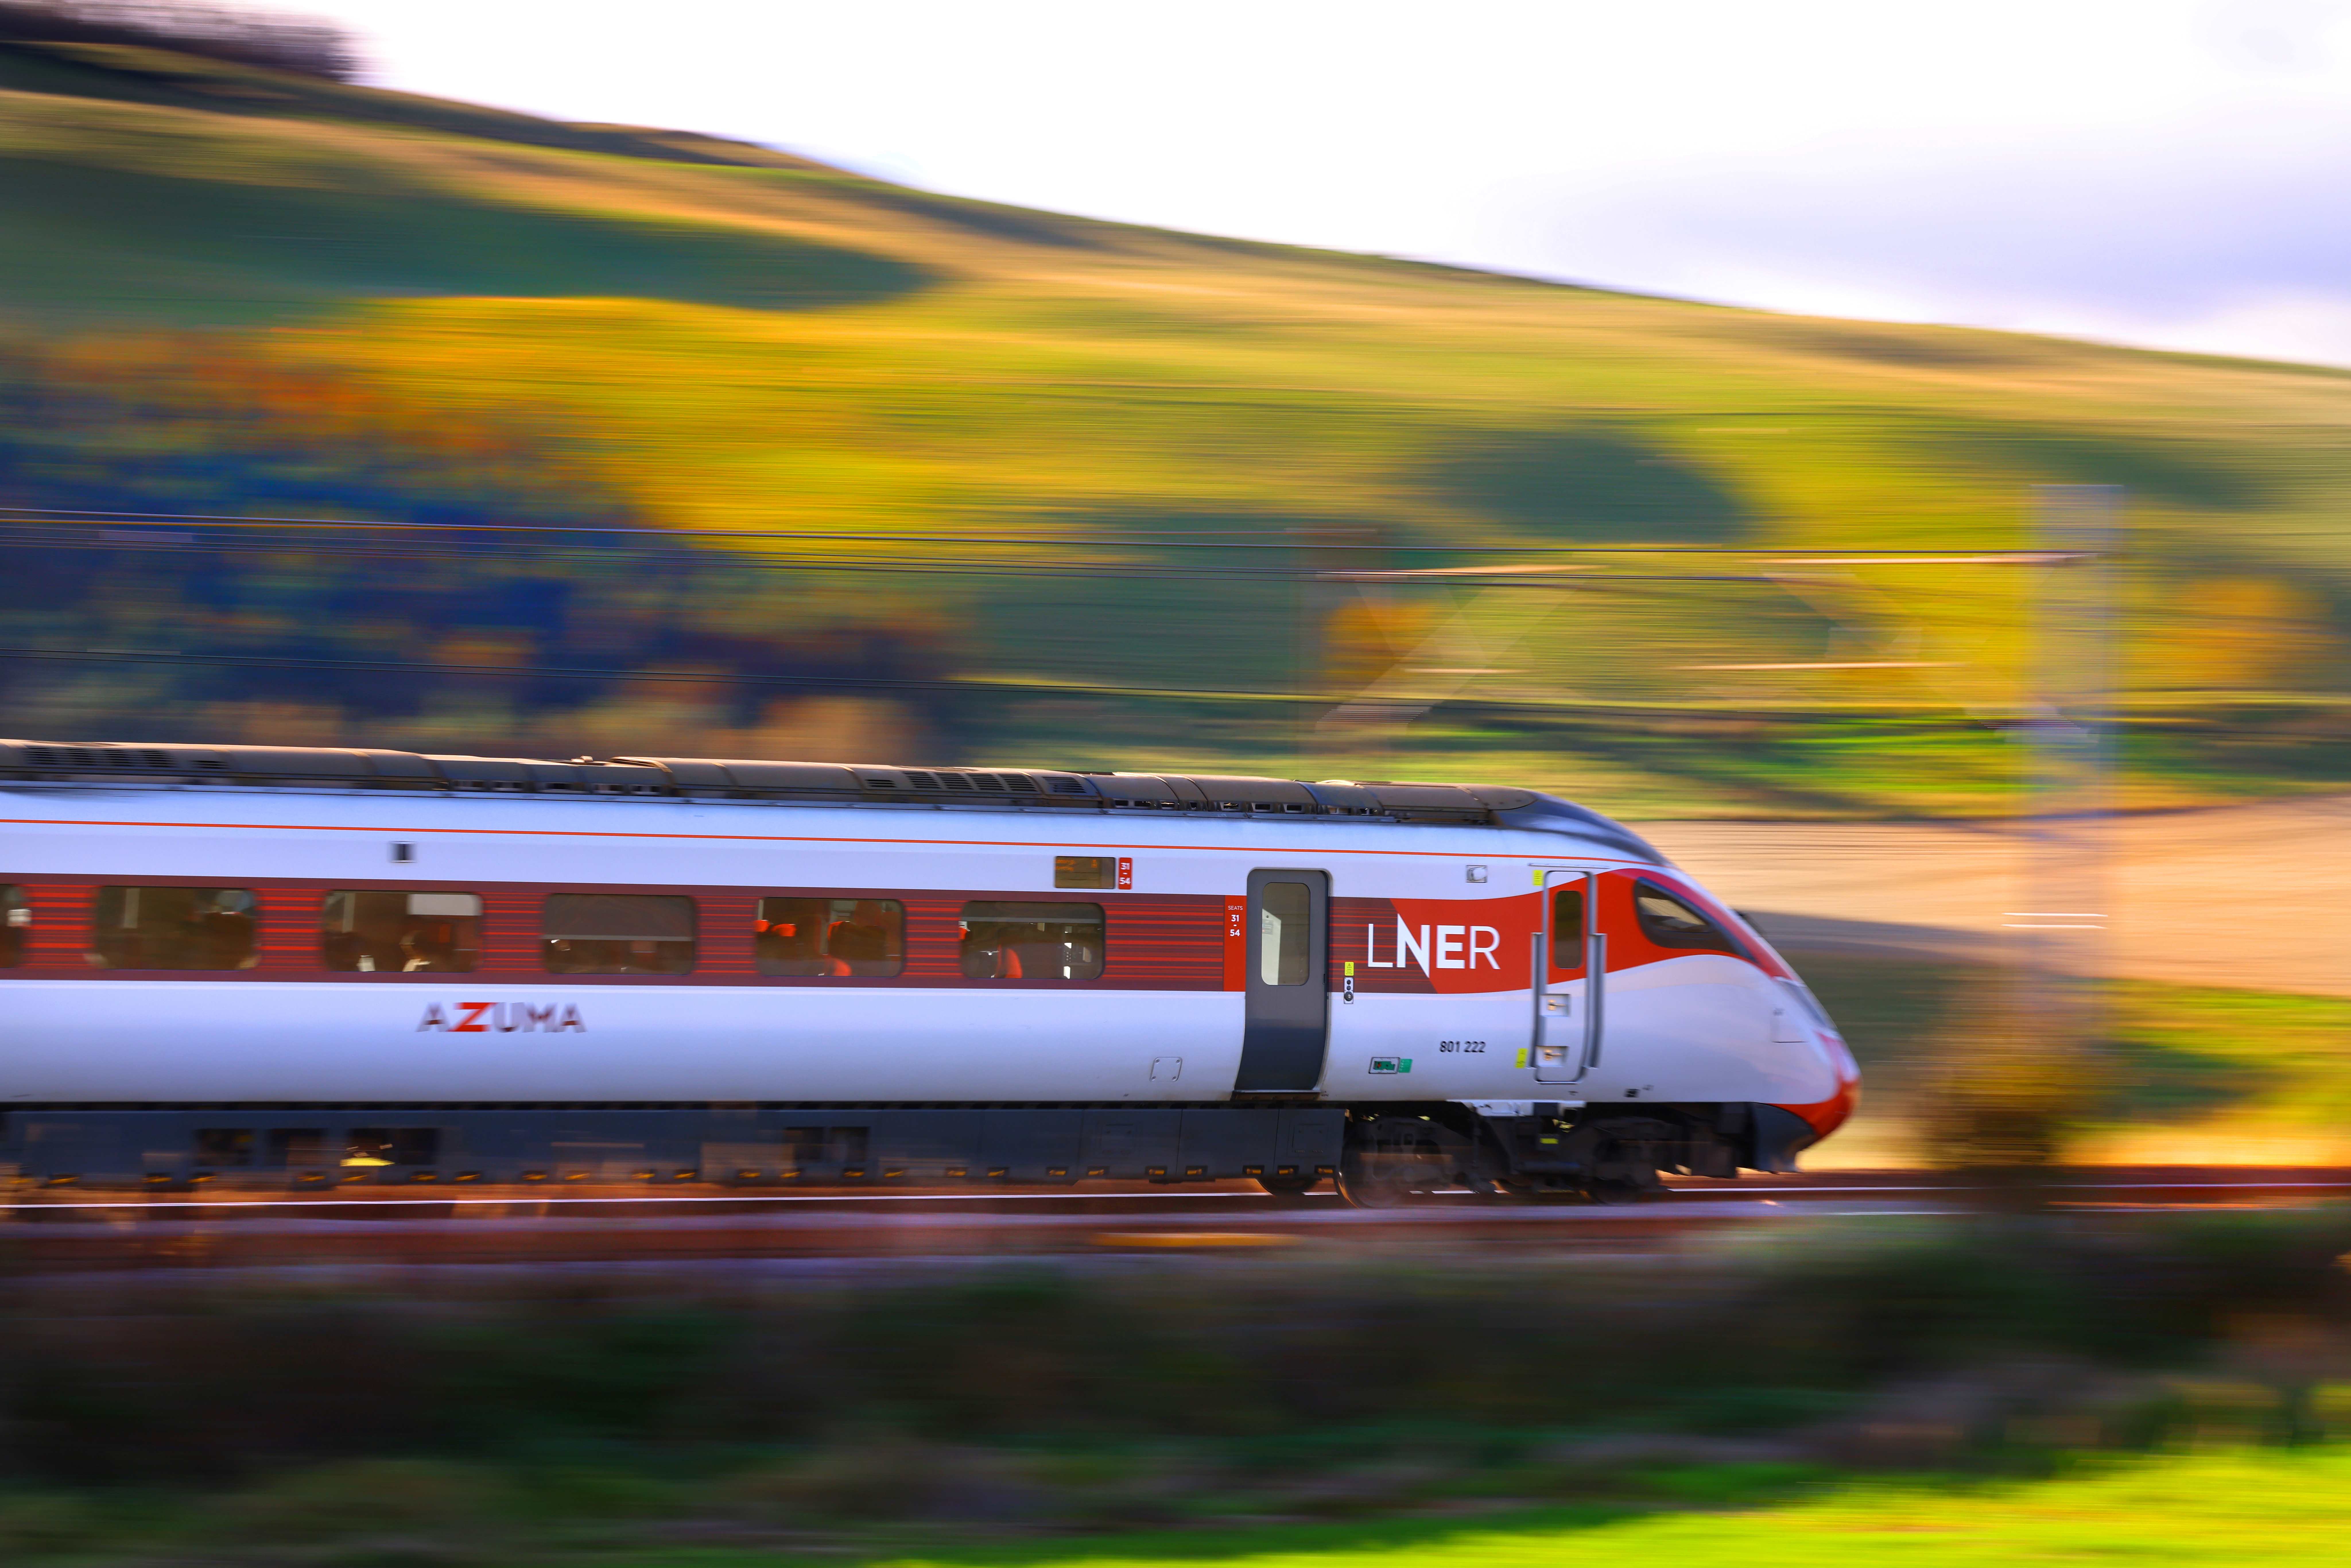 The latest news & updates from LNER